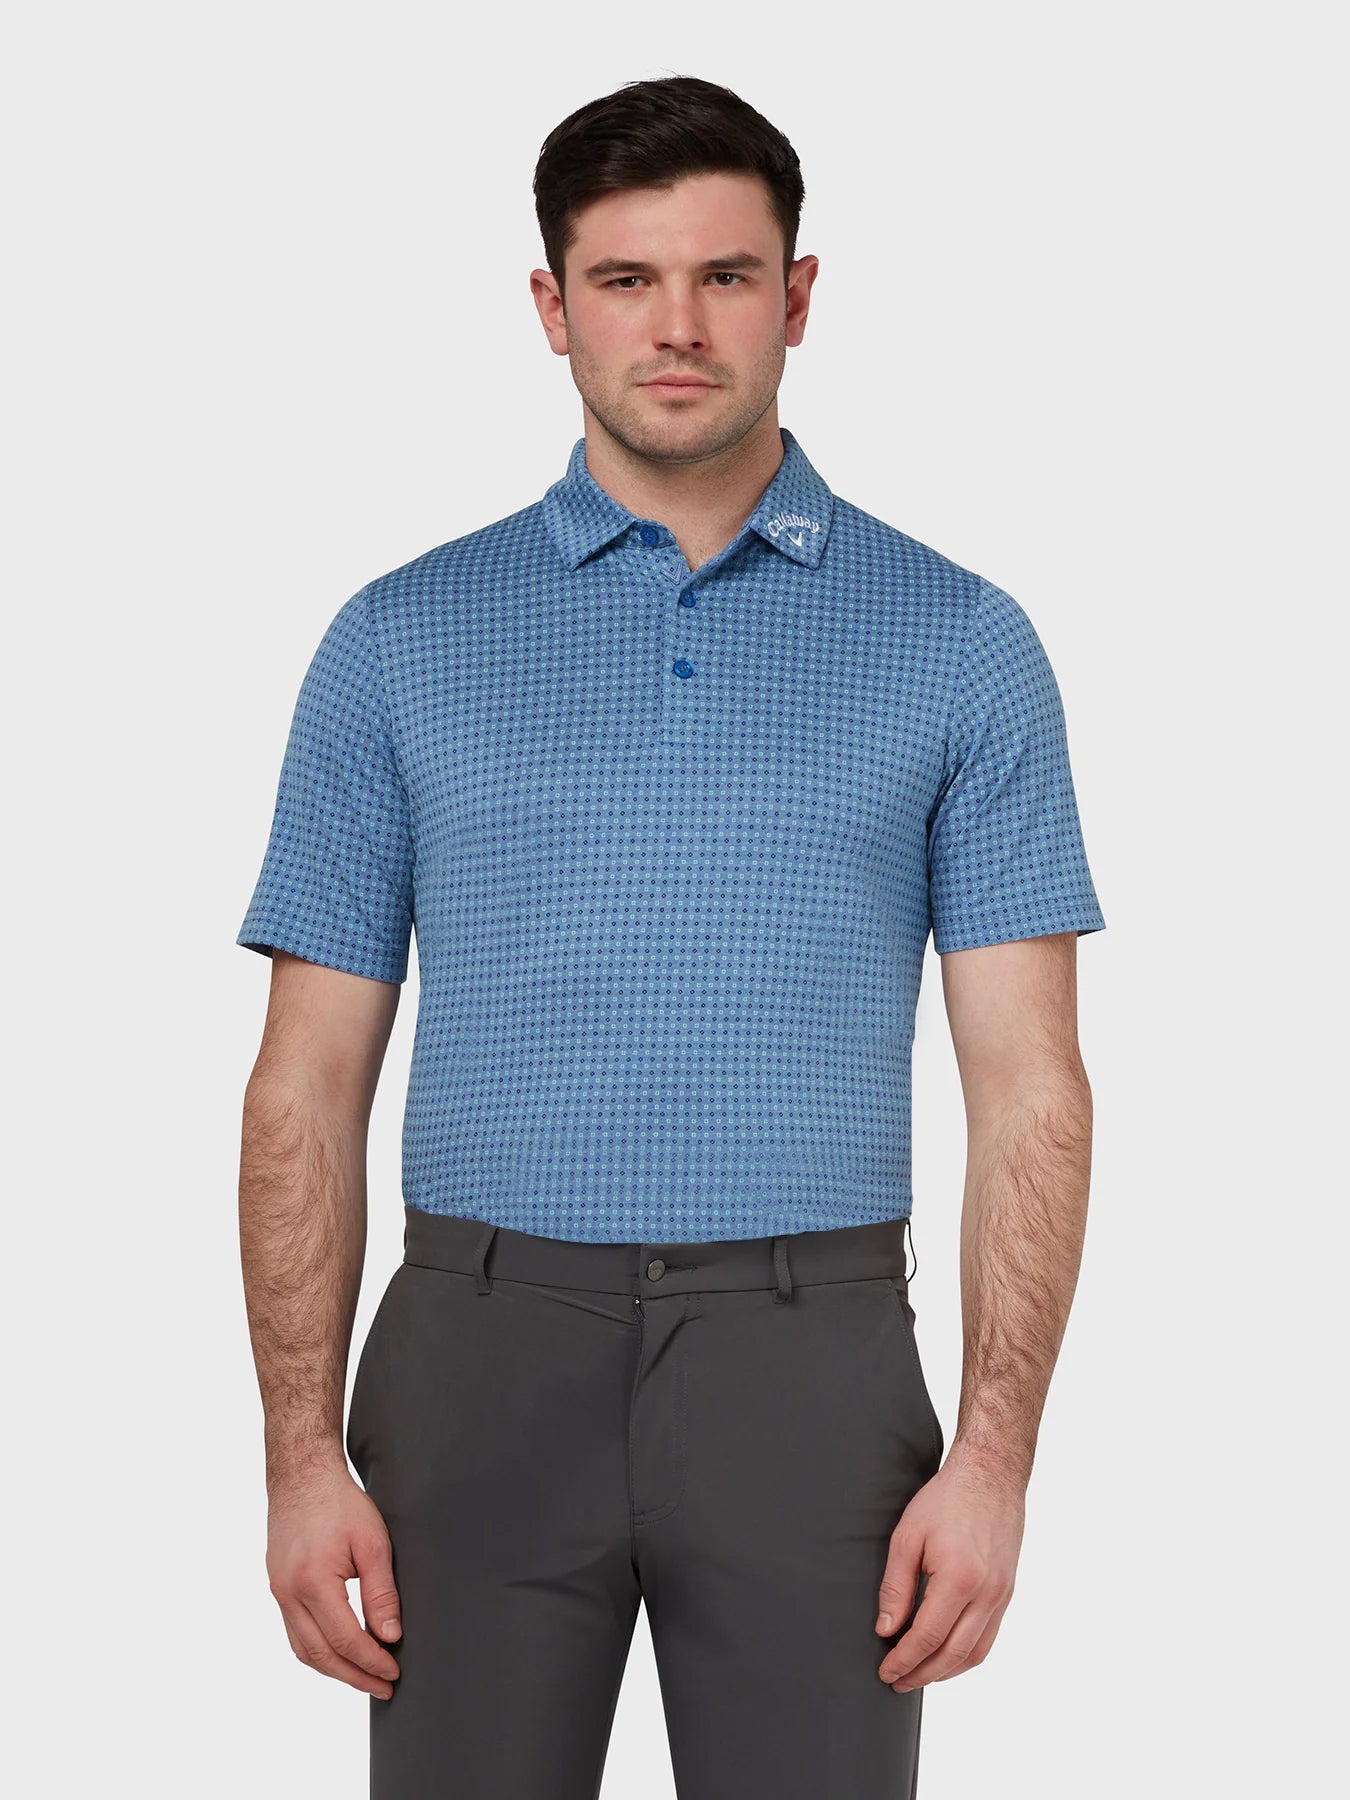 View Soft Touch Micro Print Polo In Magnetic Blue Heather Magnetic Blue Heather M information